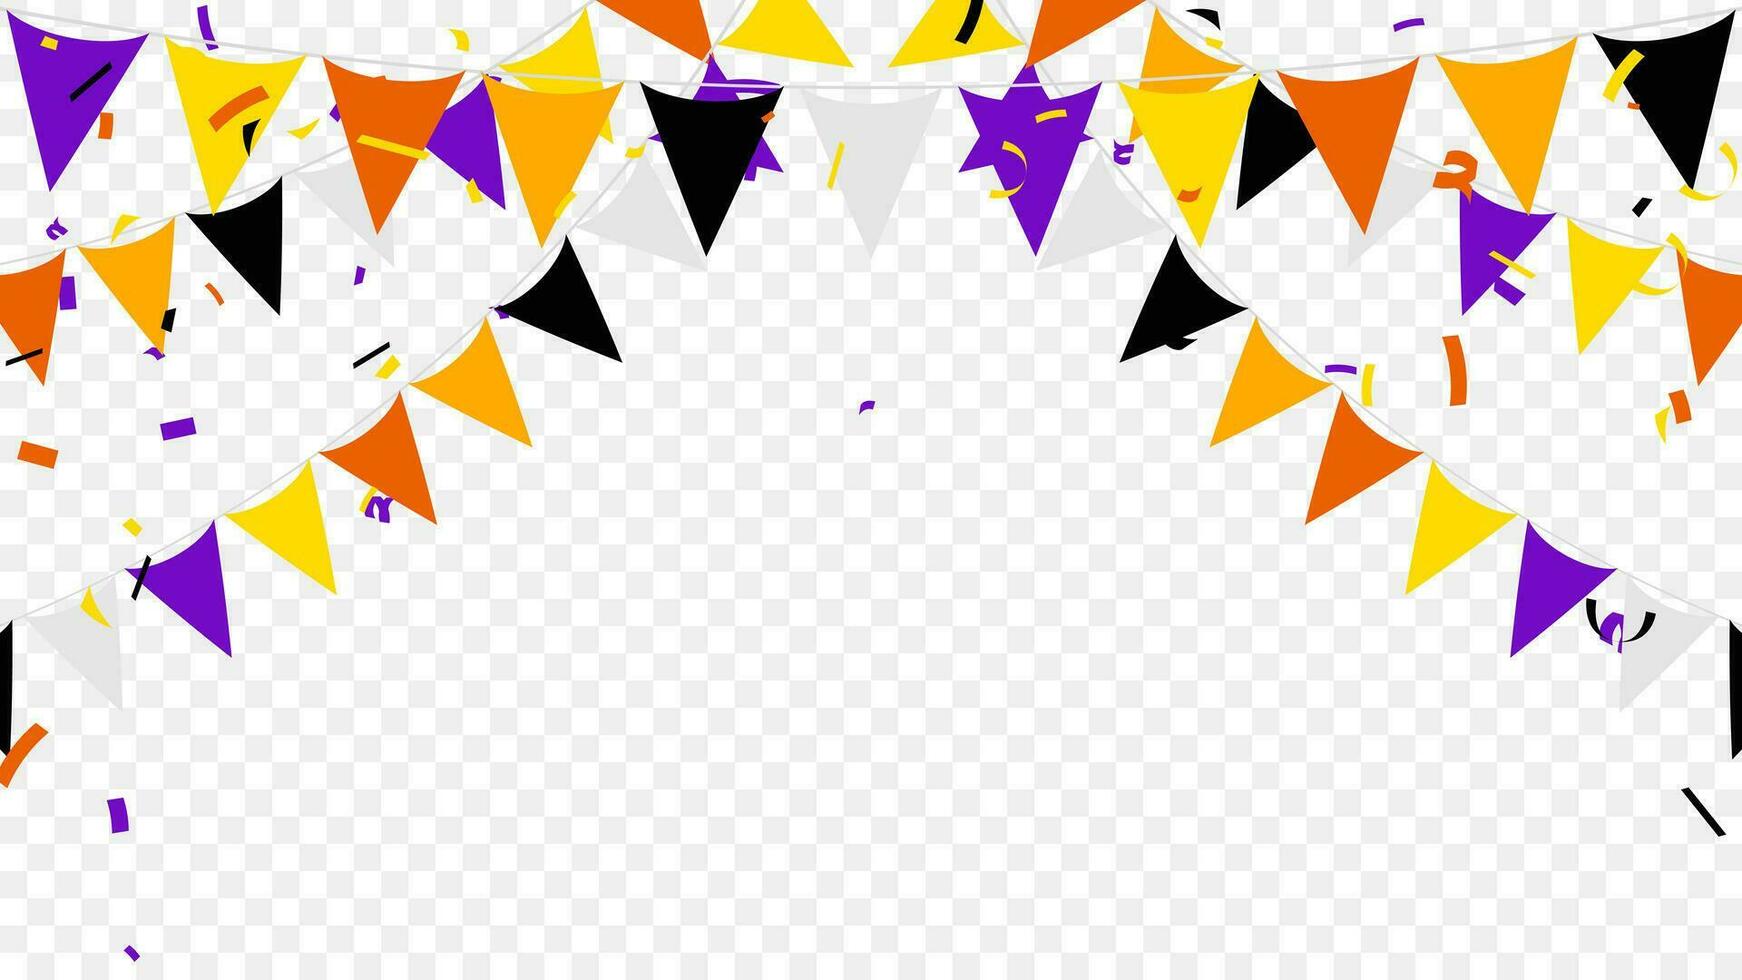 halloween flags garlands with orange, yellow, purple, gray and black isolated on background. vector illustration